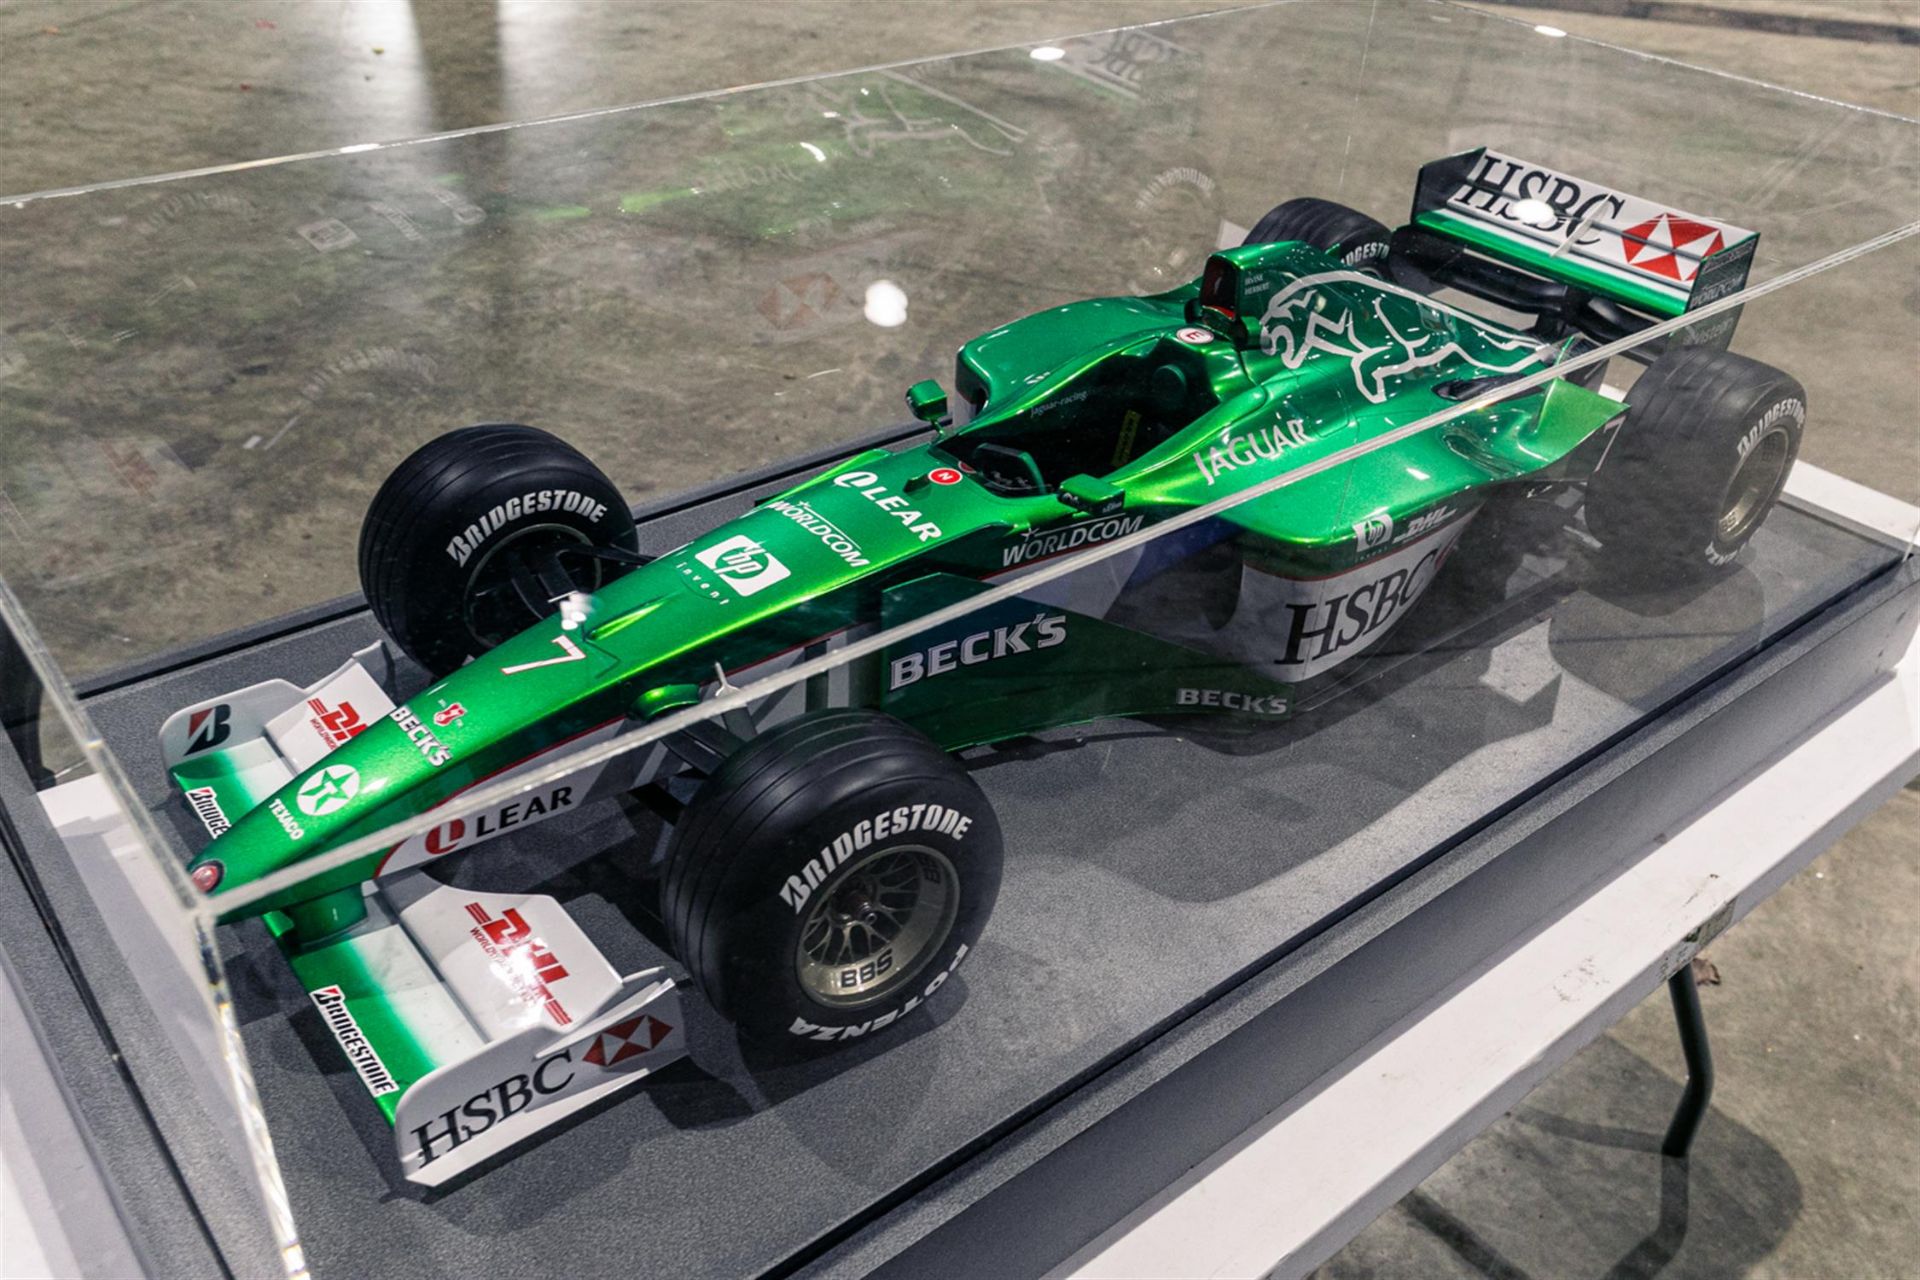 An Original 1:4 Scale Limited Edition Promotional Model of the 2000 Jaguar R1